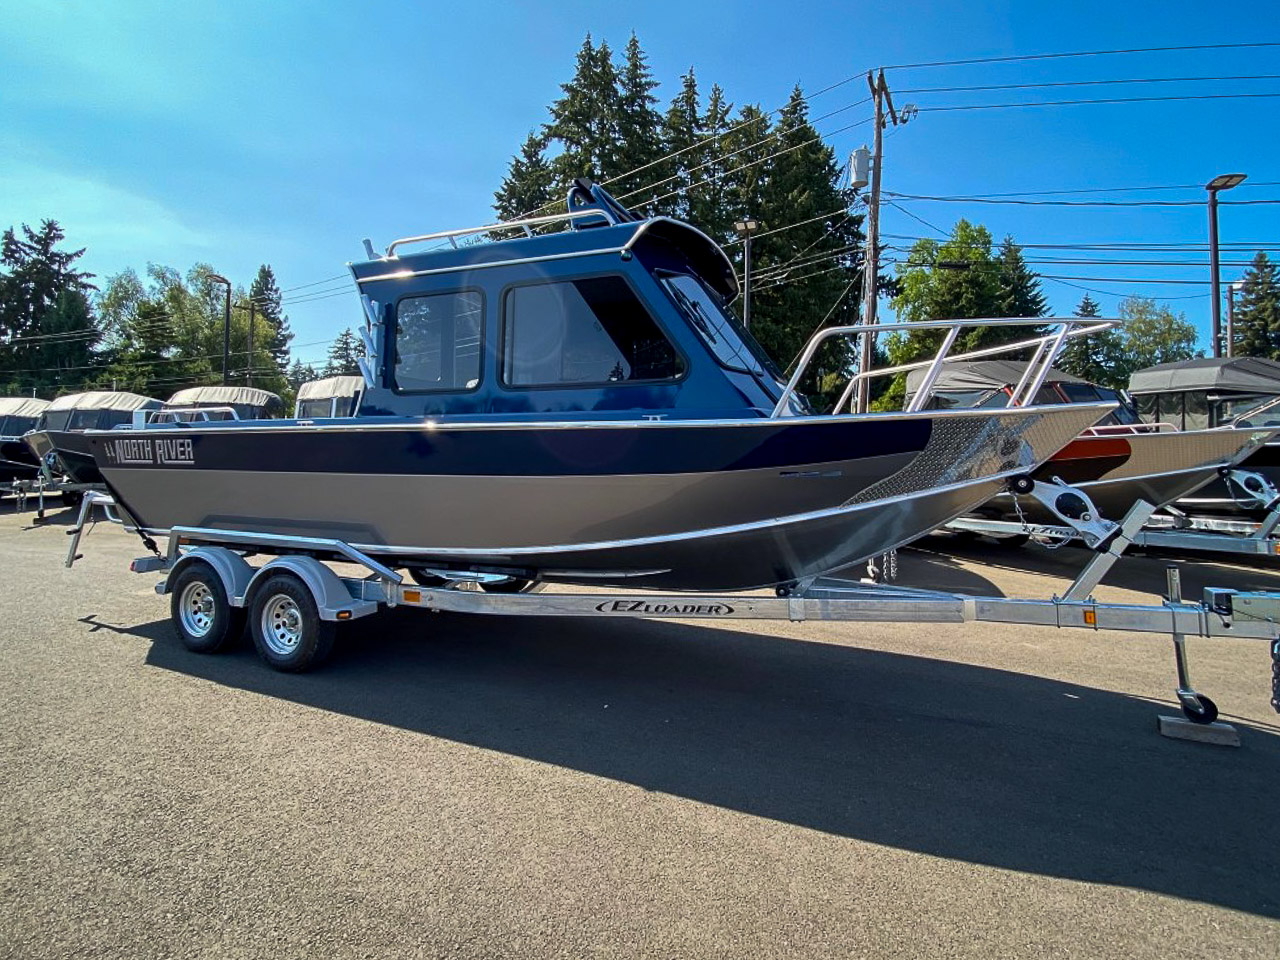 North River 24 SEAHAWK HT - ON ORDER